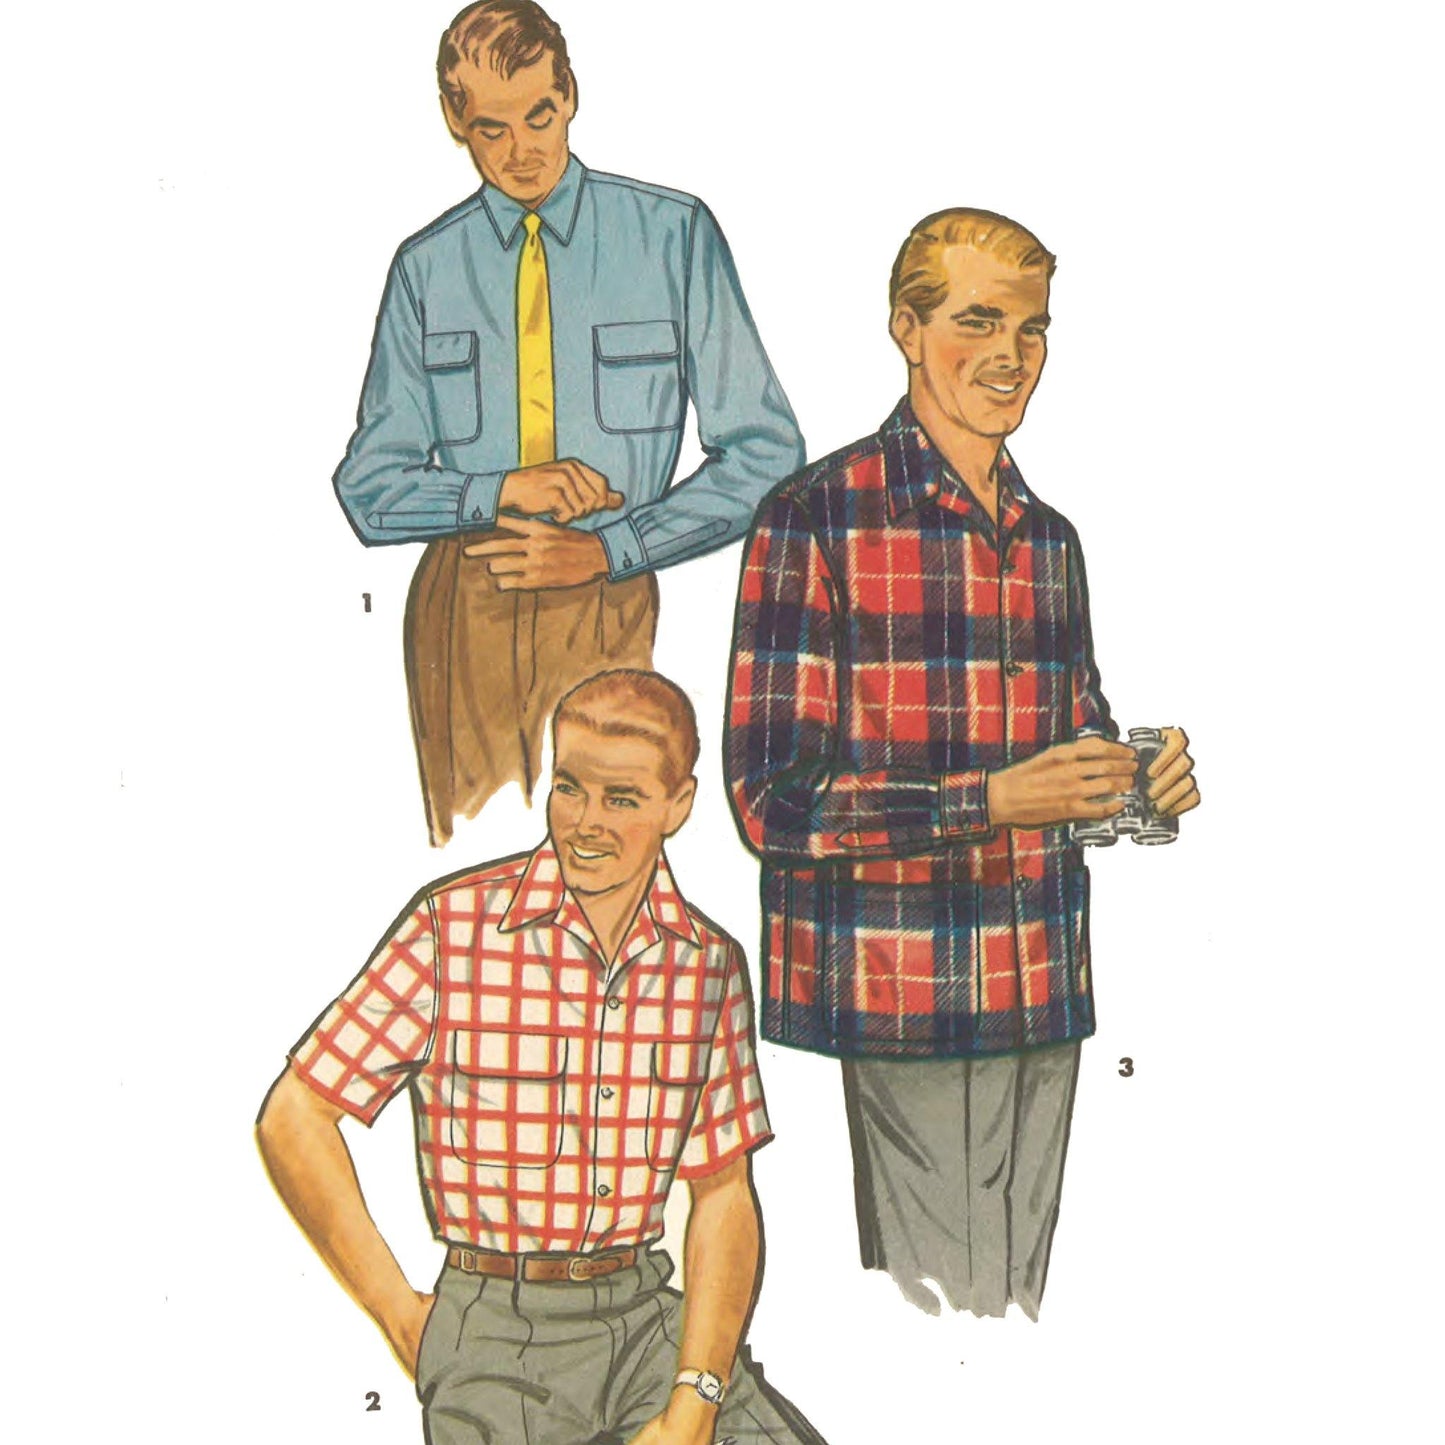 3 Men wearing vintage shirts. Left top: View 1, long sleeve with pockets. Left bottom: View 2, short sleeves with pockets. Right: View 3, long sleeves no pockets.